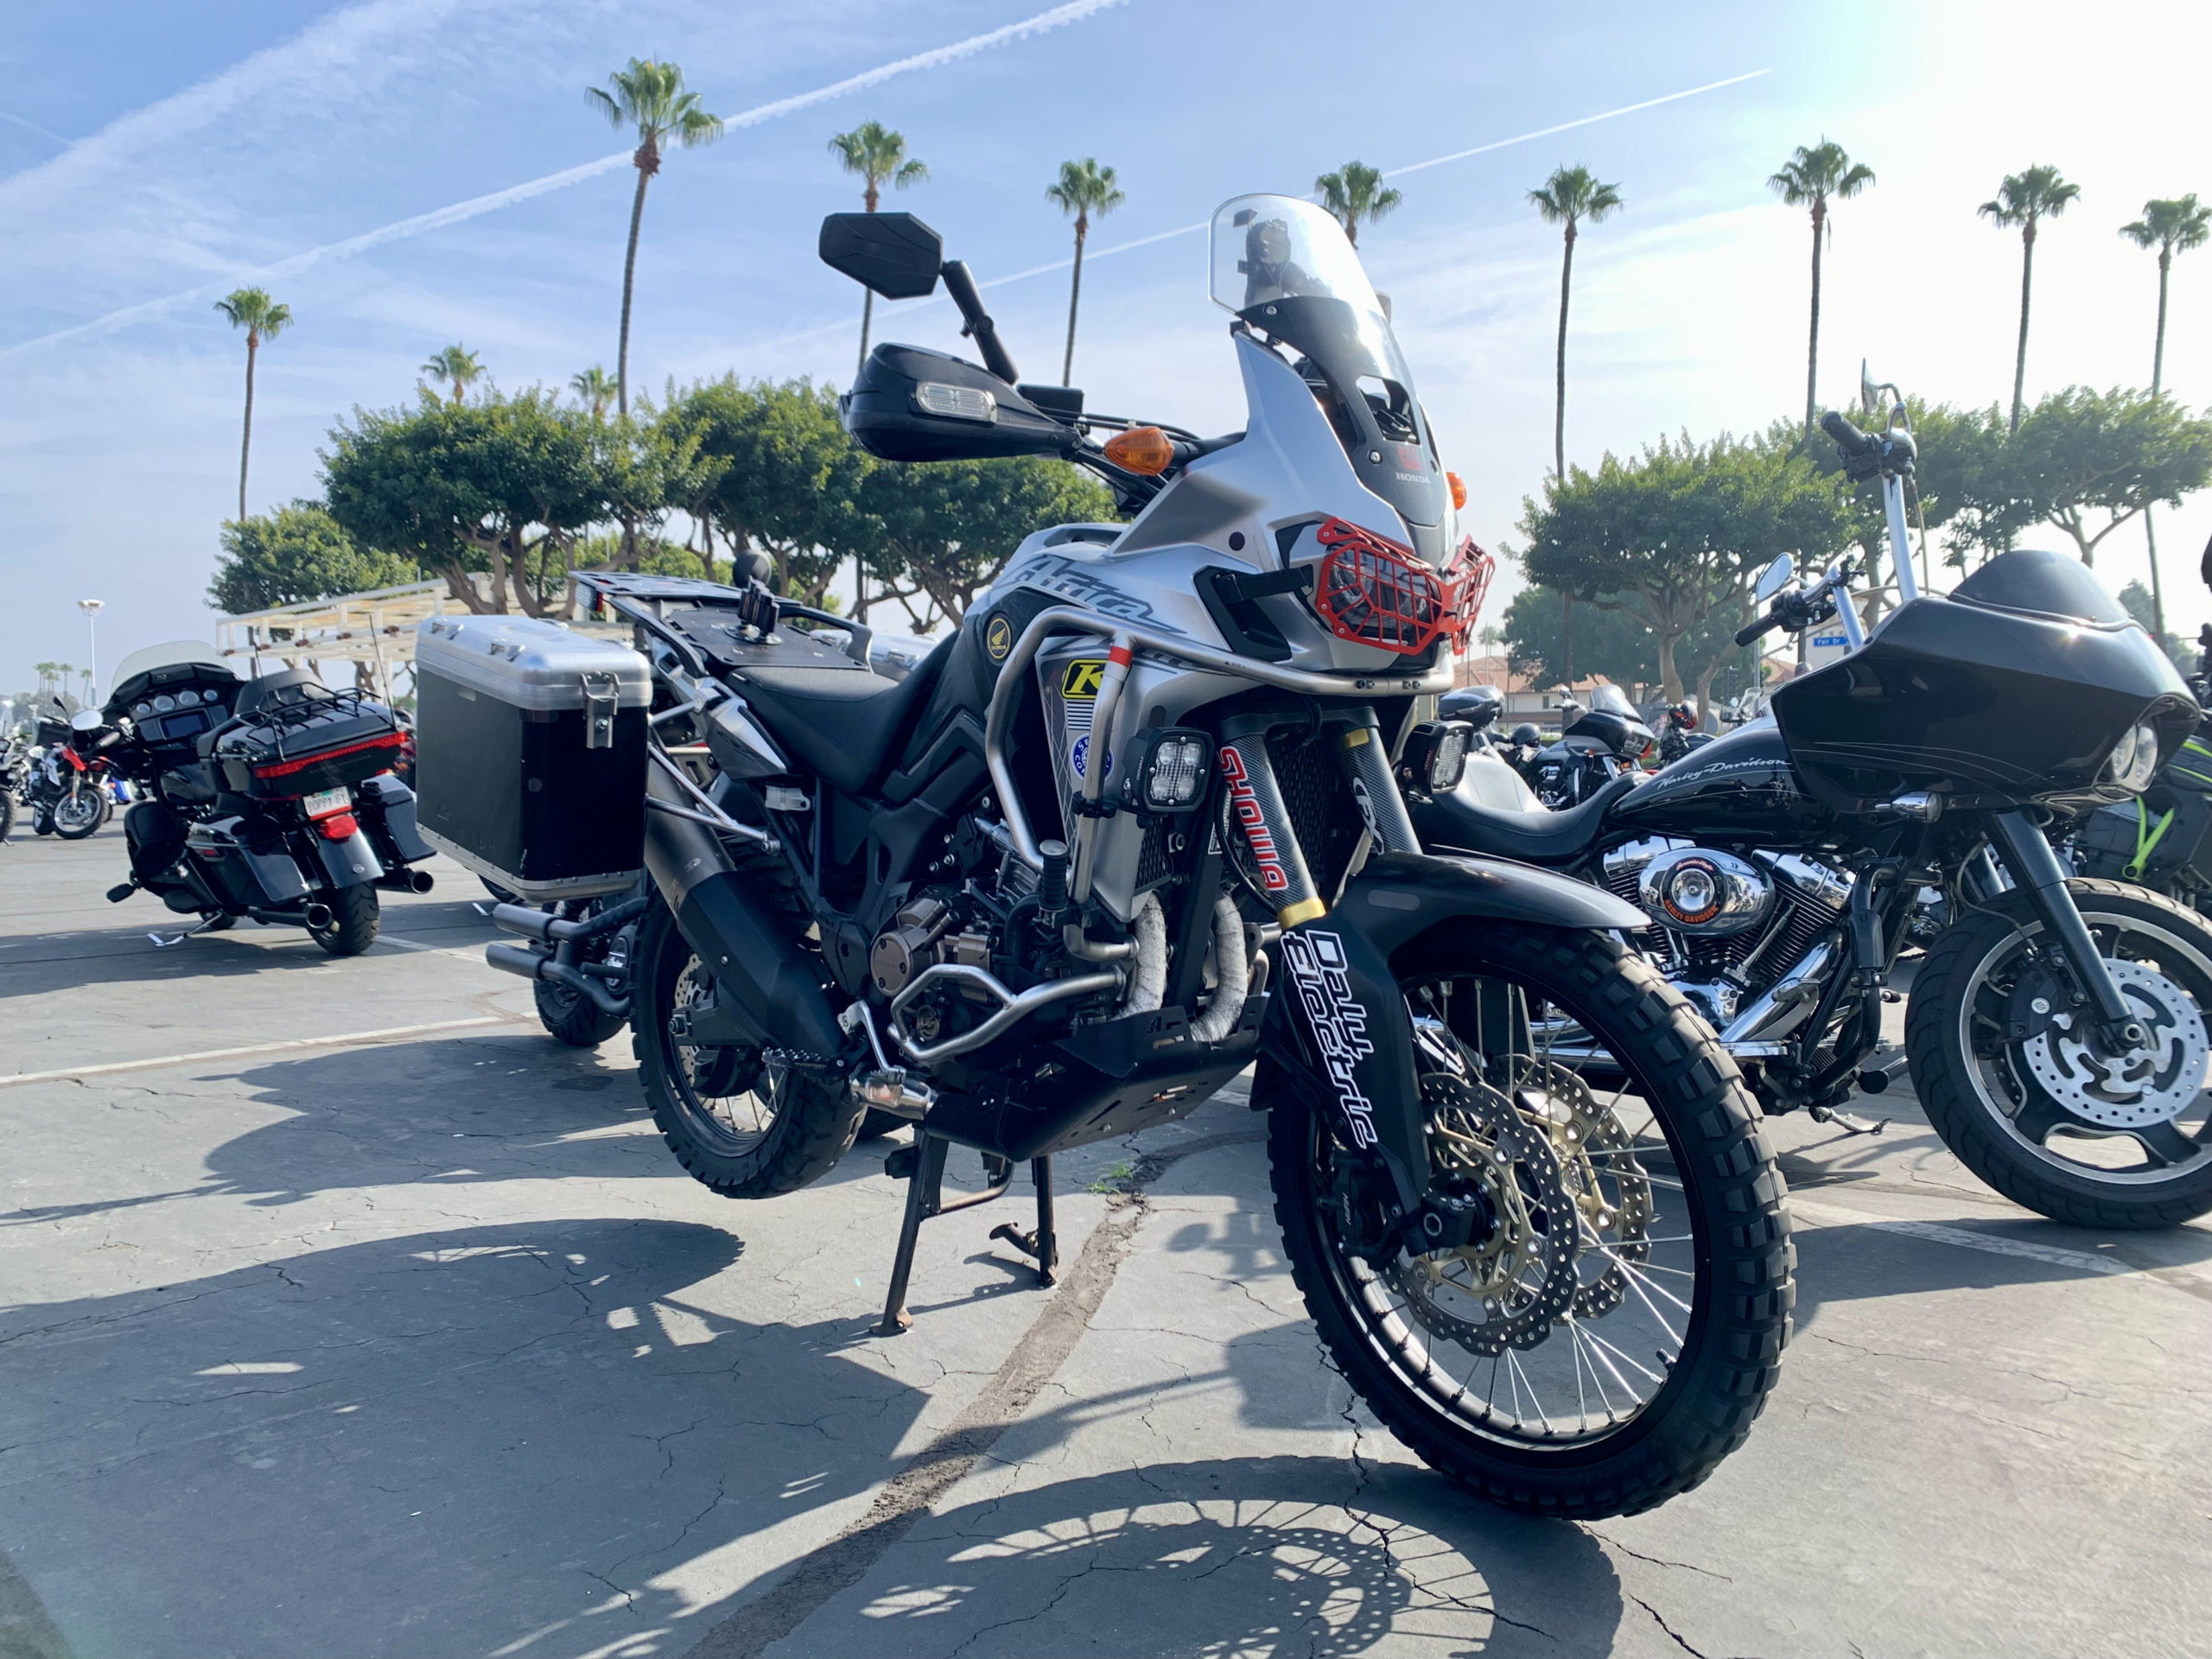 Honda Africa parked in lot for IMS 2021